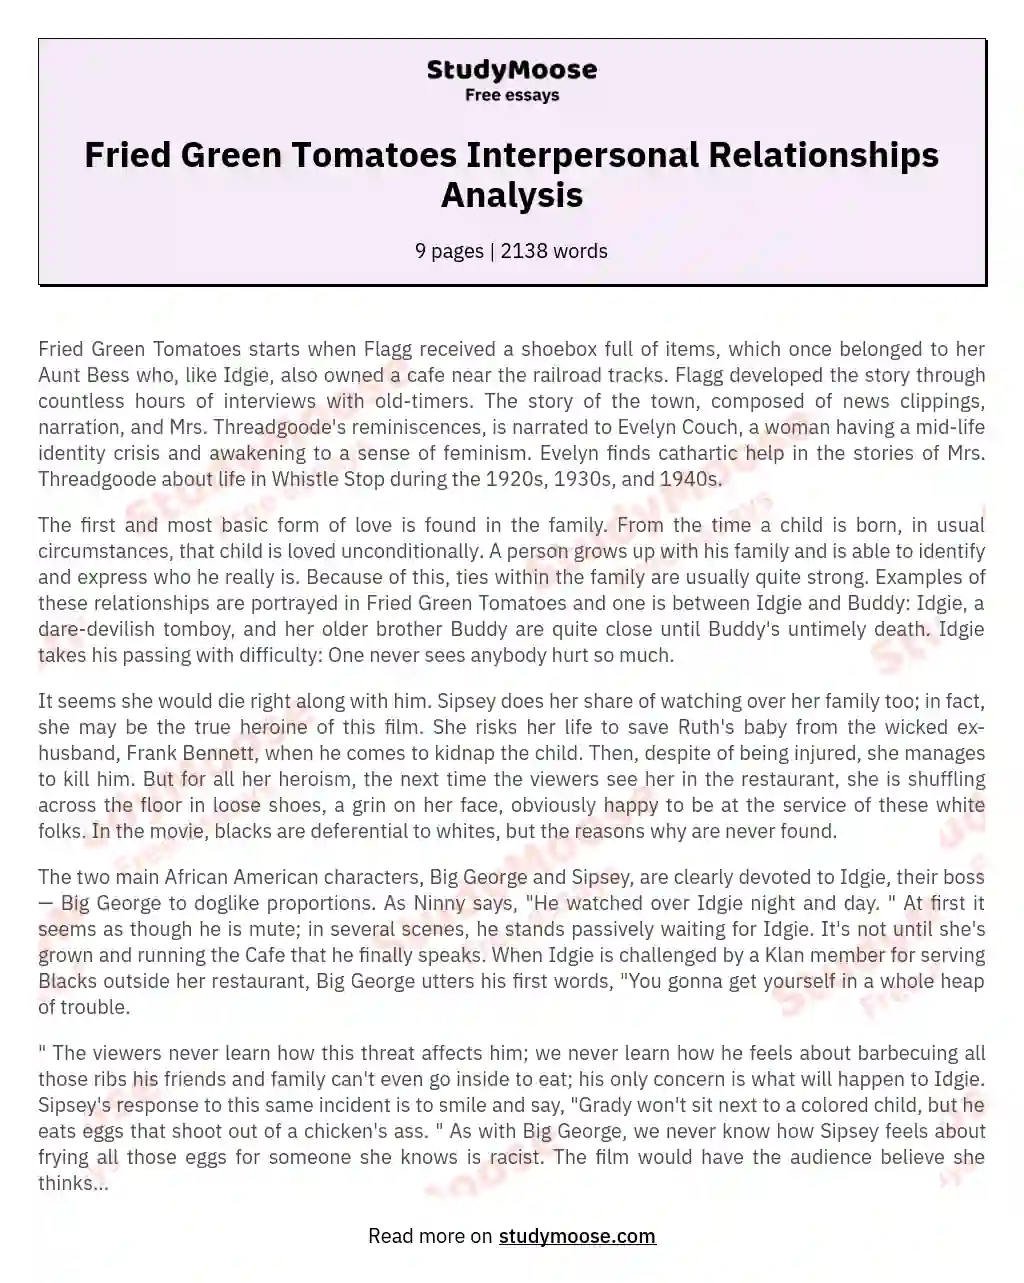 Fried Green Tomatoes Interpersonal Relationships Analysis